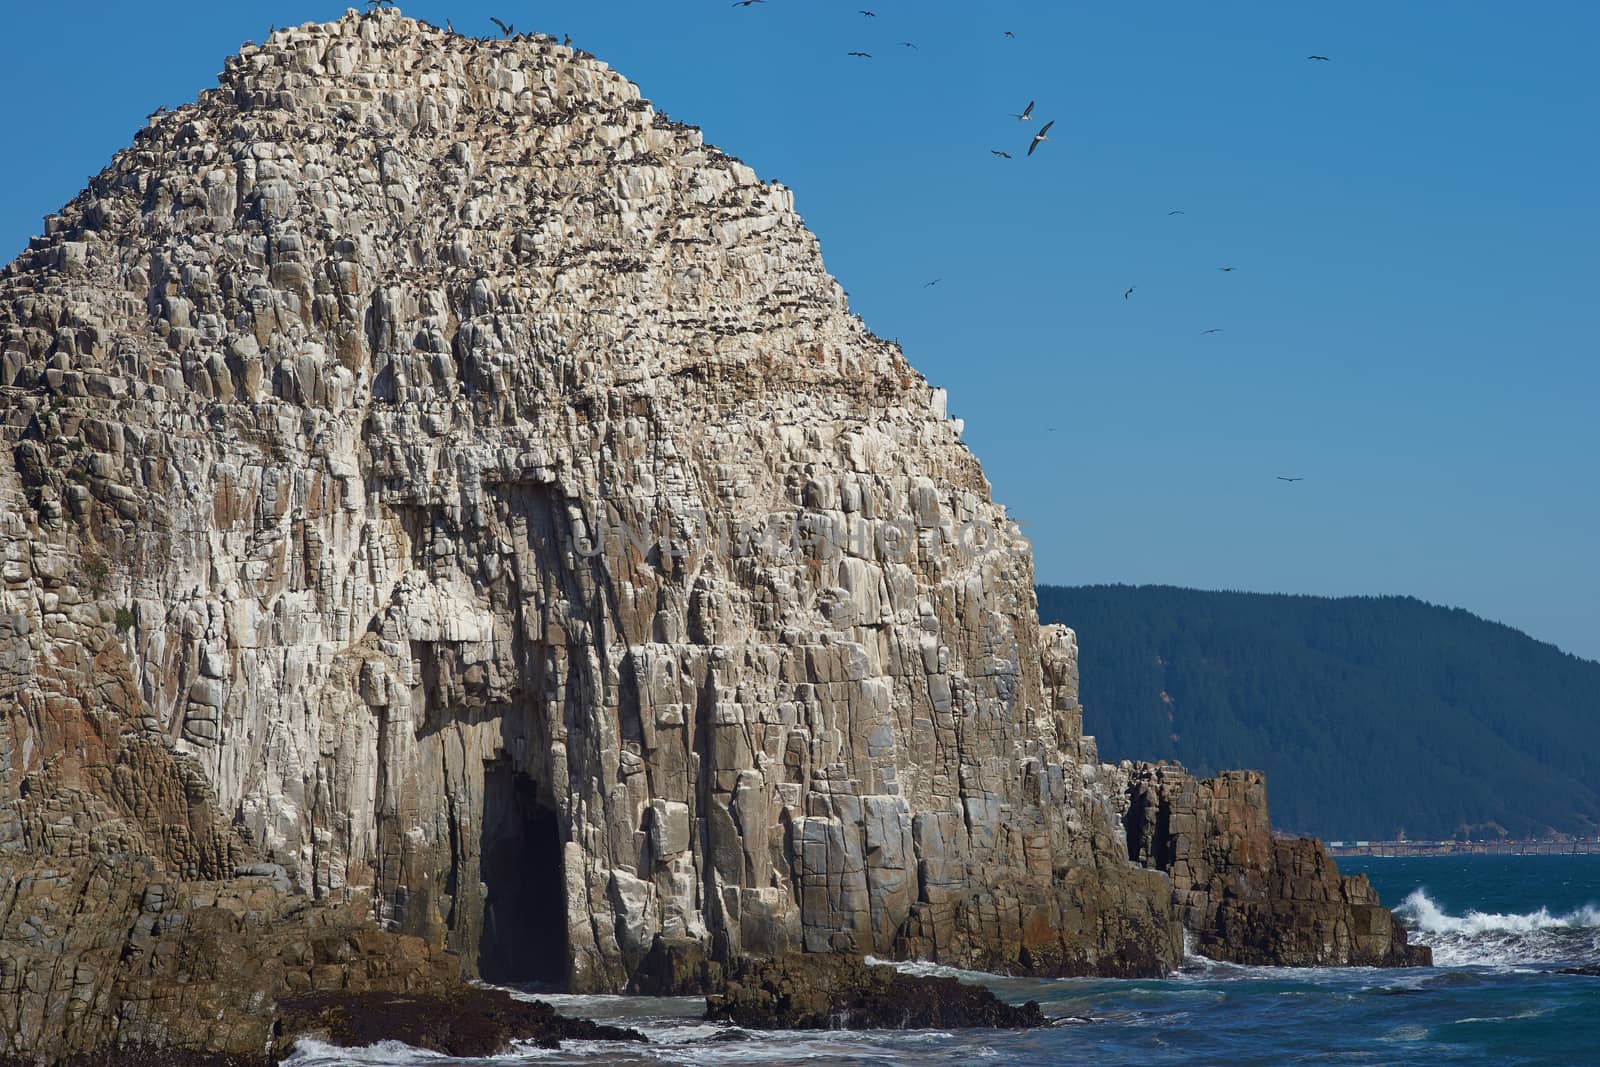 Large rocks on the coast of Chile near the city of Constitucion that are home to huge colonies of Peruvian Pelicans (Pelecanus thagus) and other seabirds.